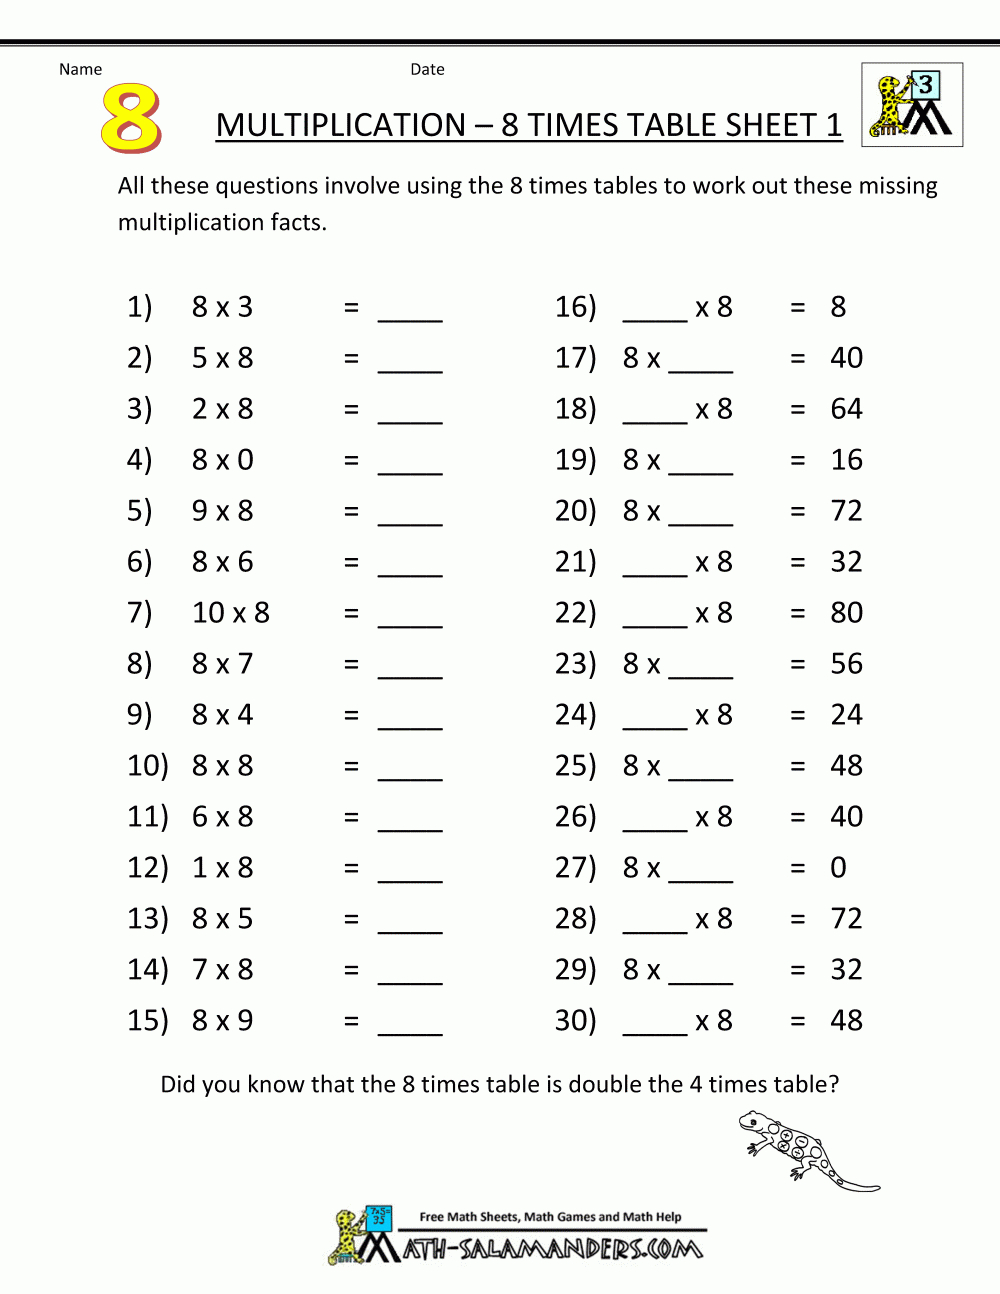 Multiplication Printable Worksheets 8 Times Table 1 | Education And | Free Printable Math Worksheets Multiplication Facts